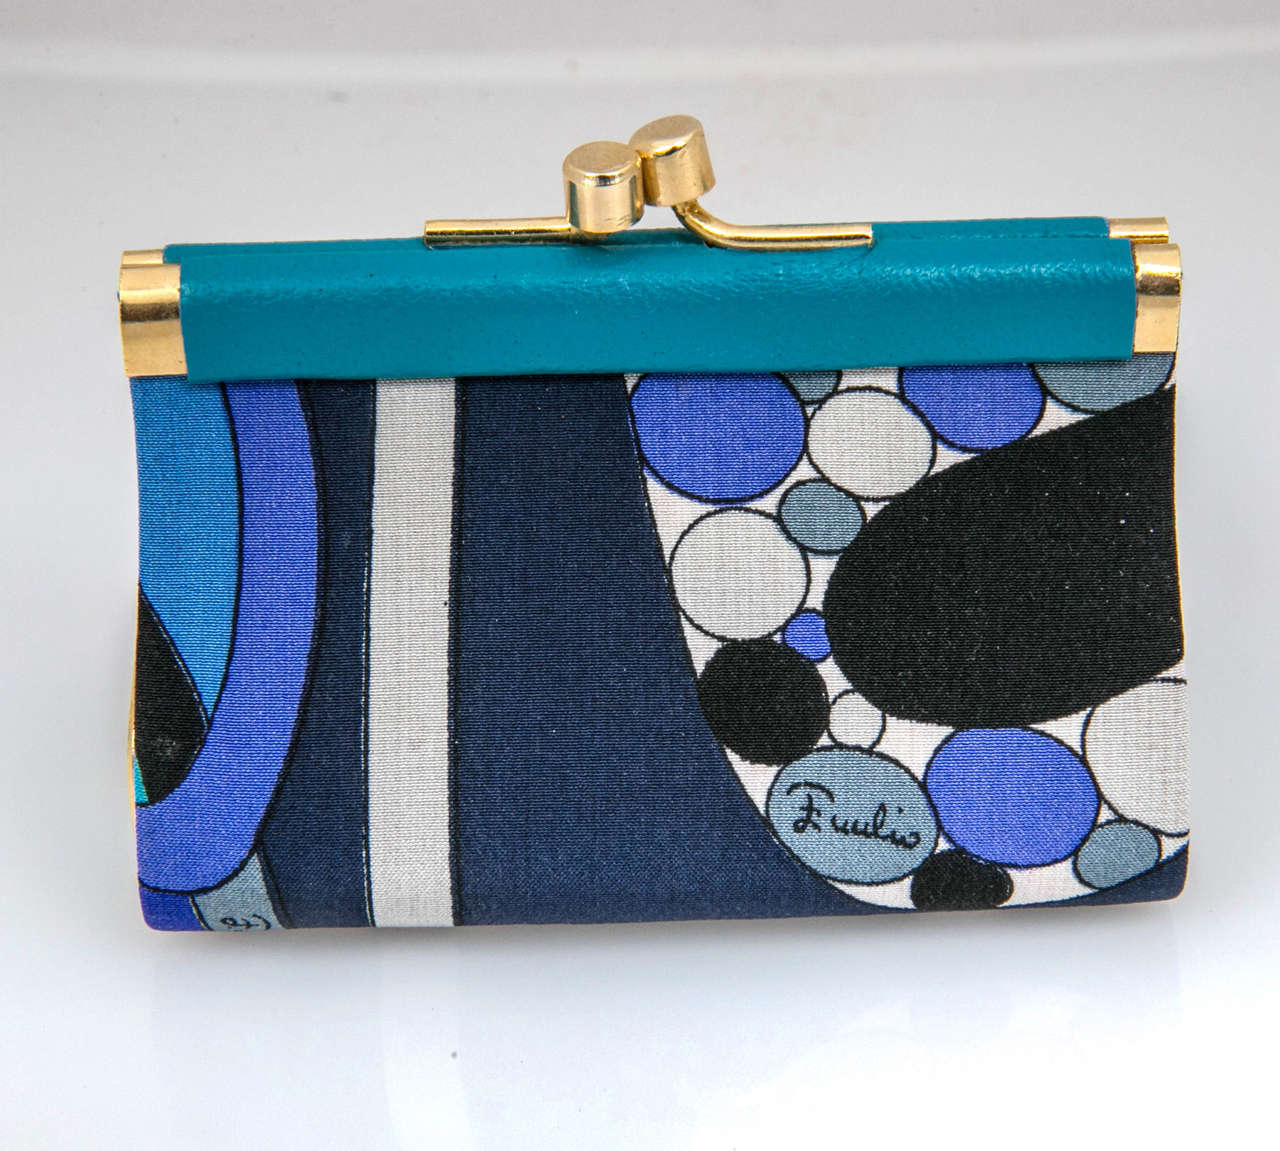 never used vintage pucci coin purse featuring a silk blend modernist print surround with turquoise leather accents. features 3 'emilio' signatures within the motif: rare on a small change purse. classic brass kiss lock closure.